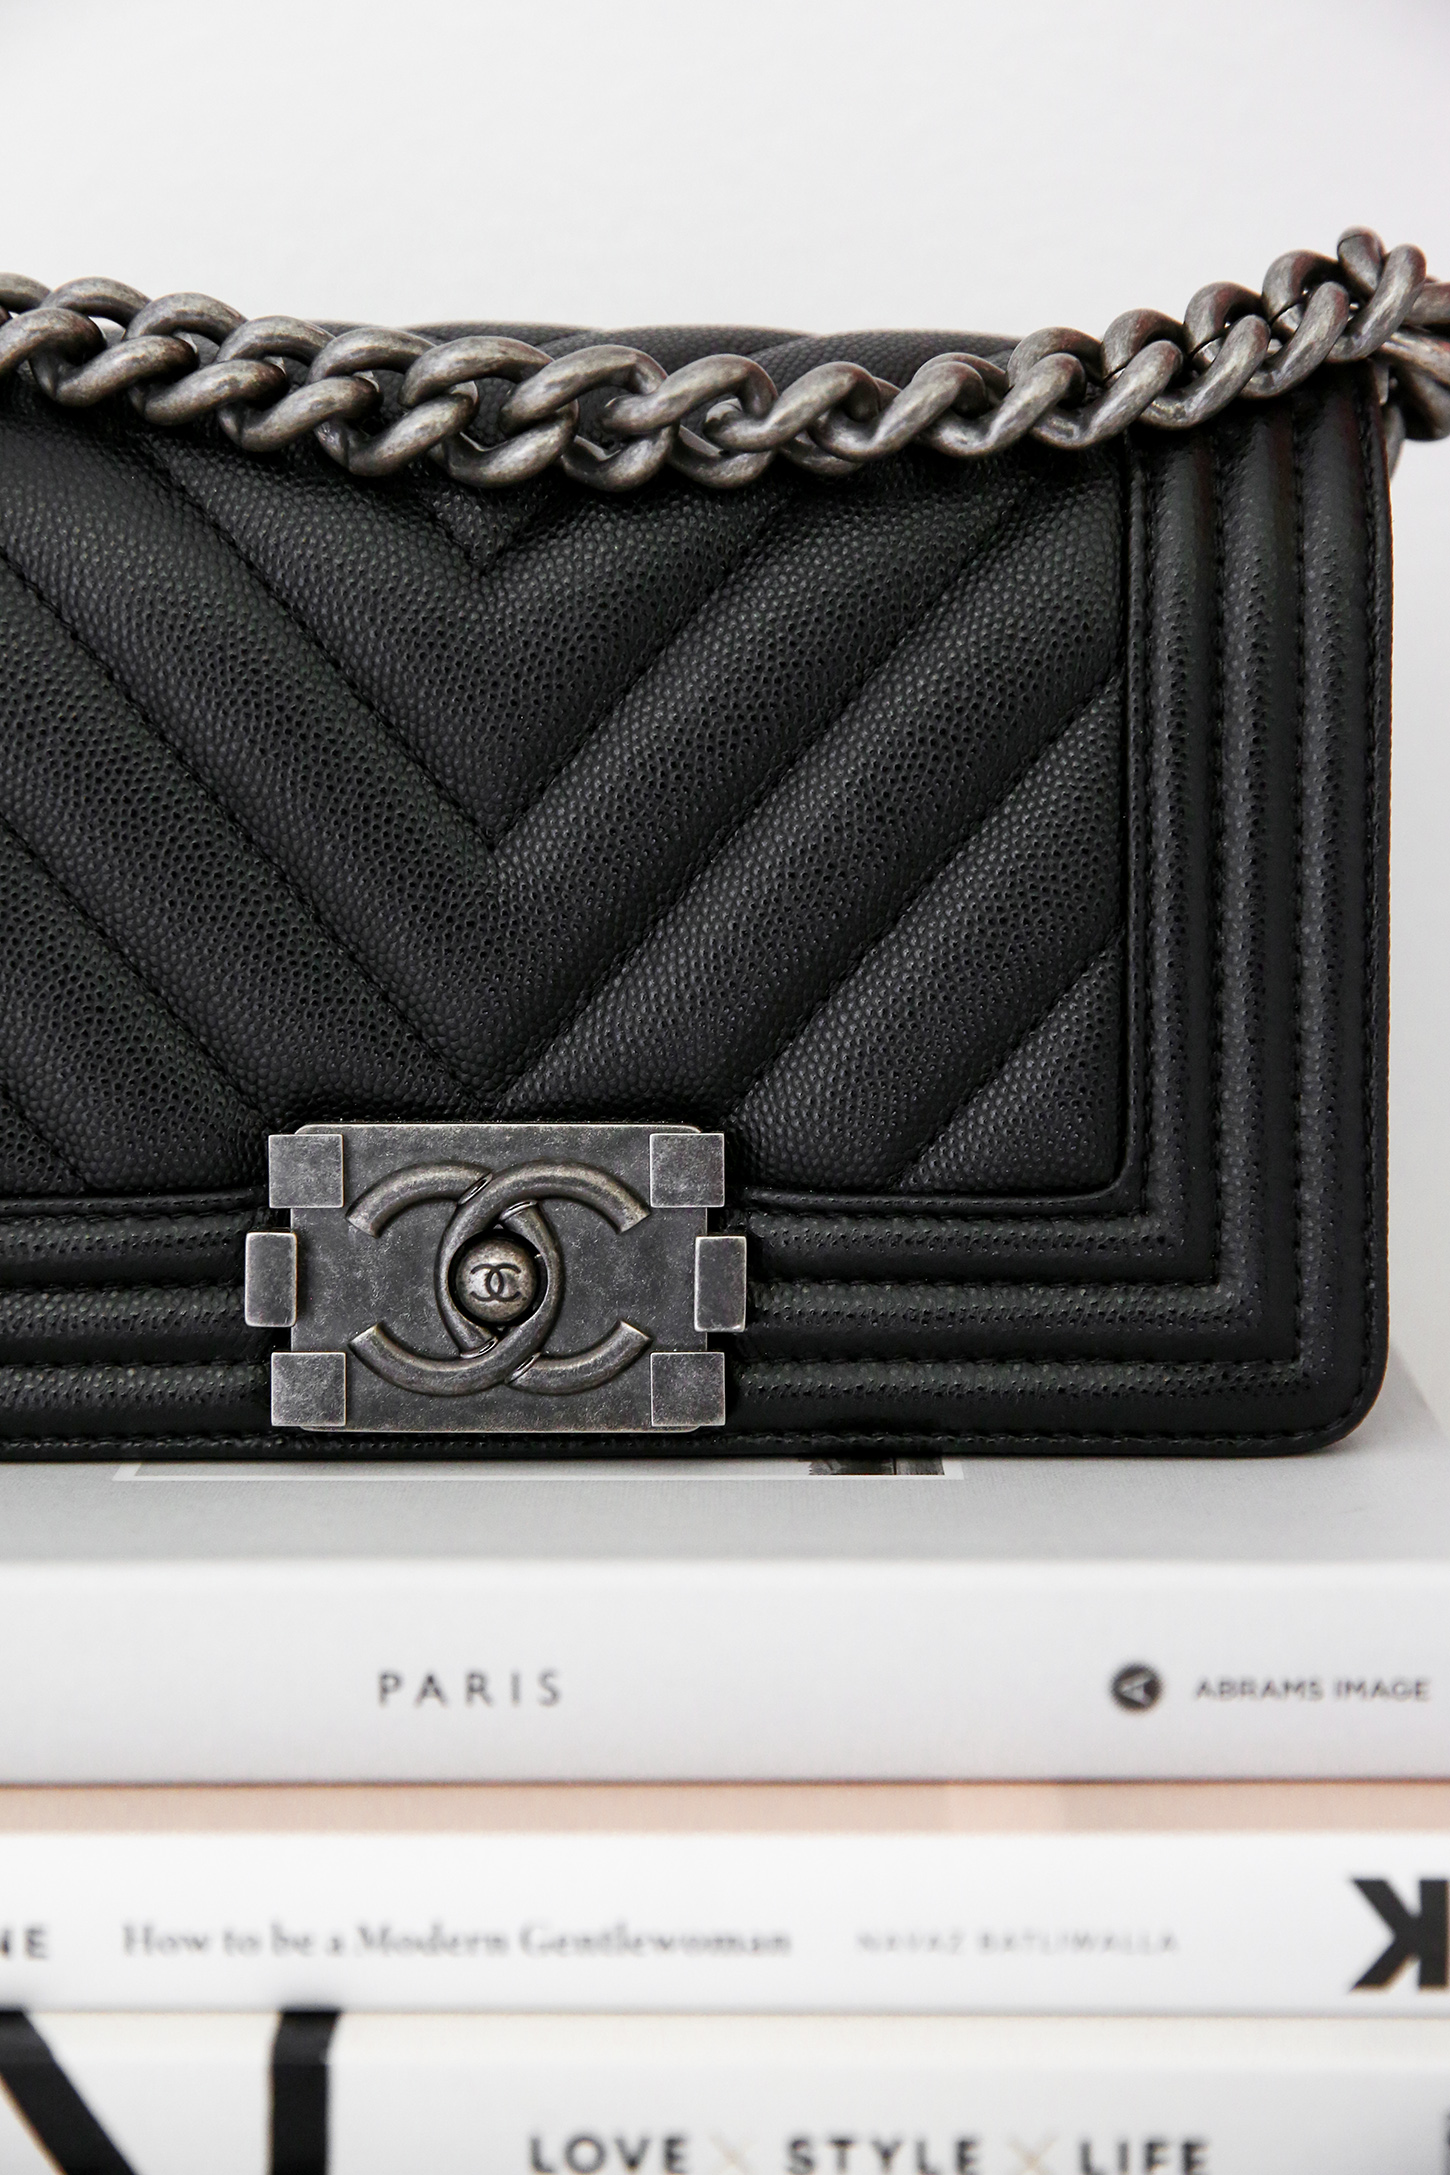 Is The Chanel Boy Bag Worth It?! - Fashion For Lunch.